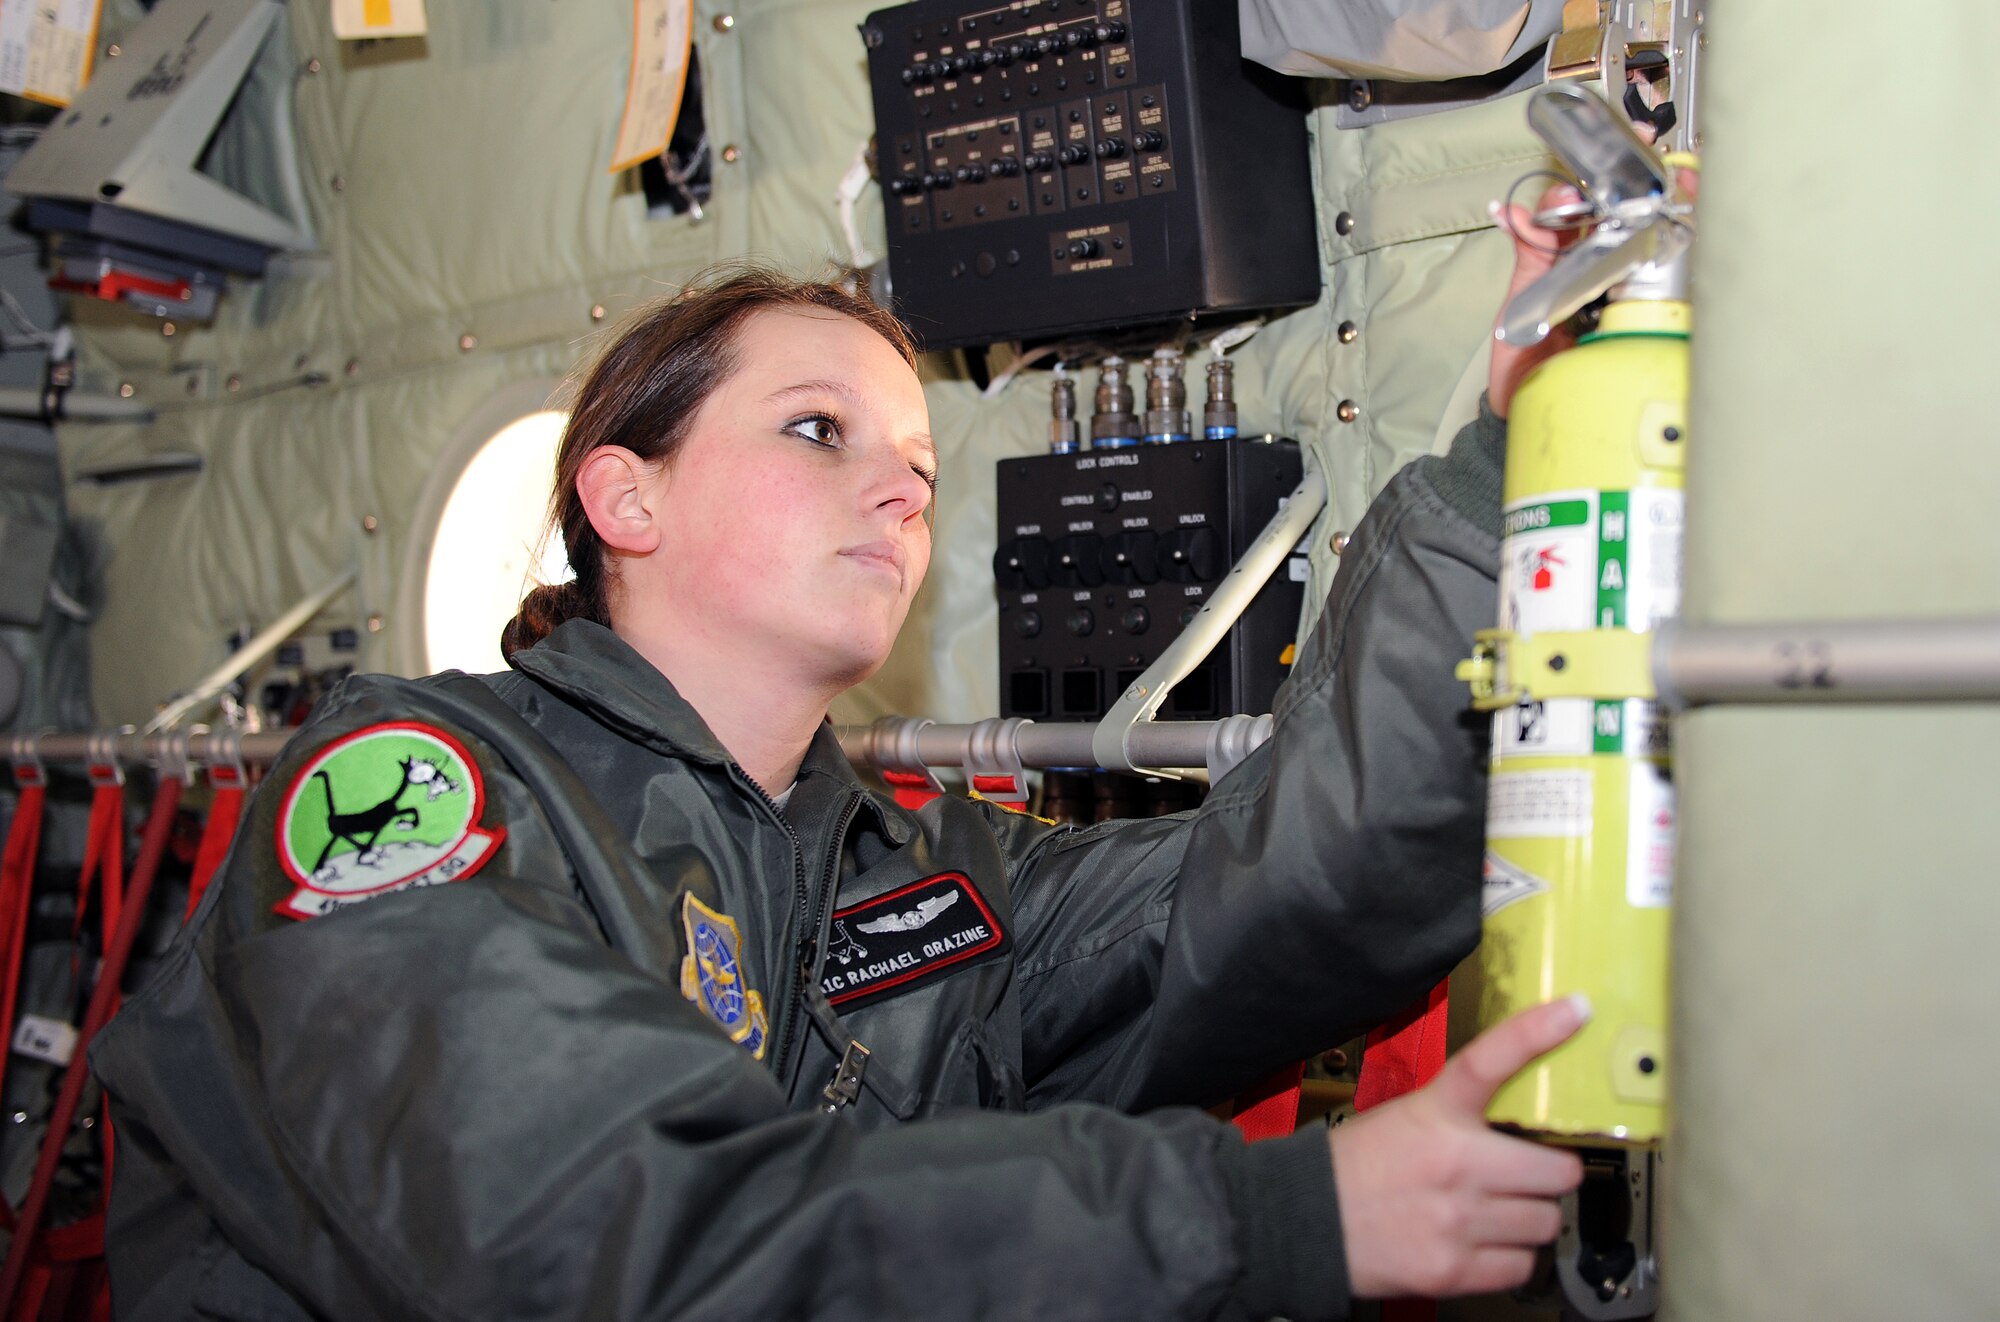 Airman 1st Class Rachel Orazine, a 41st Airlift Squadron loadmaster, checks a fire extinguisher as part of a preflight check on a C-130 Jan. 25, 2011, on the flightline at Little Rock Air Force Base, Ark. Airman Orazine received the Chief’s Group Sharp Troop Award for finishing her first Career Development Course test and obtaining her second set of books while deployed. She was also  the youngest squadron Airman selected for Air Mobility Command Mobility Air Forces Exercises. (Air Force photo by Airman 1st Class Ellora Stewart)